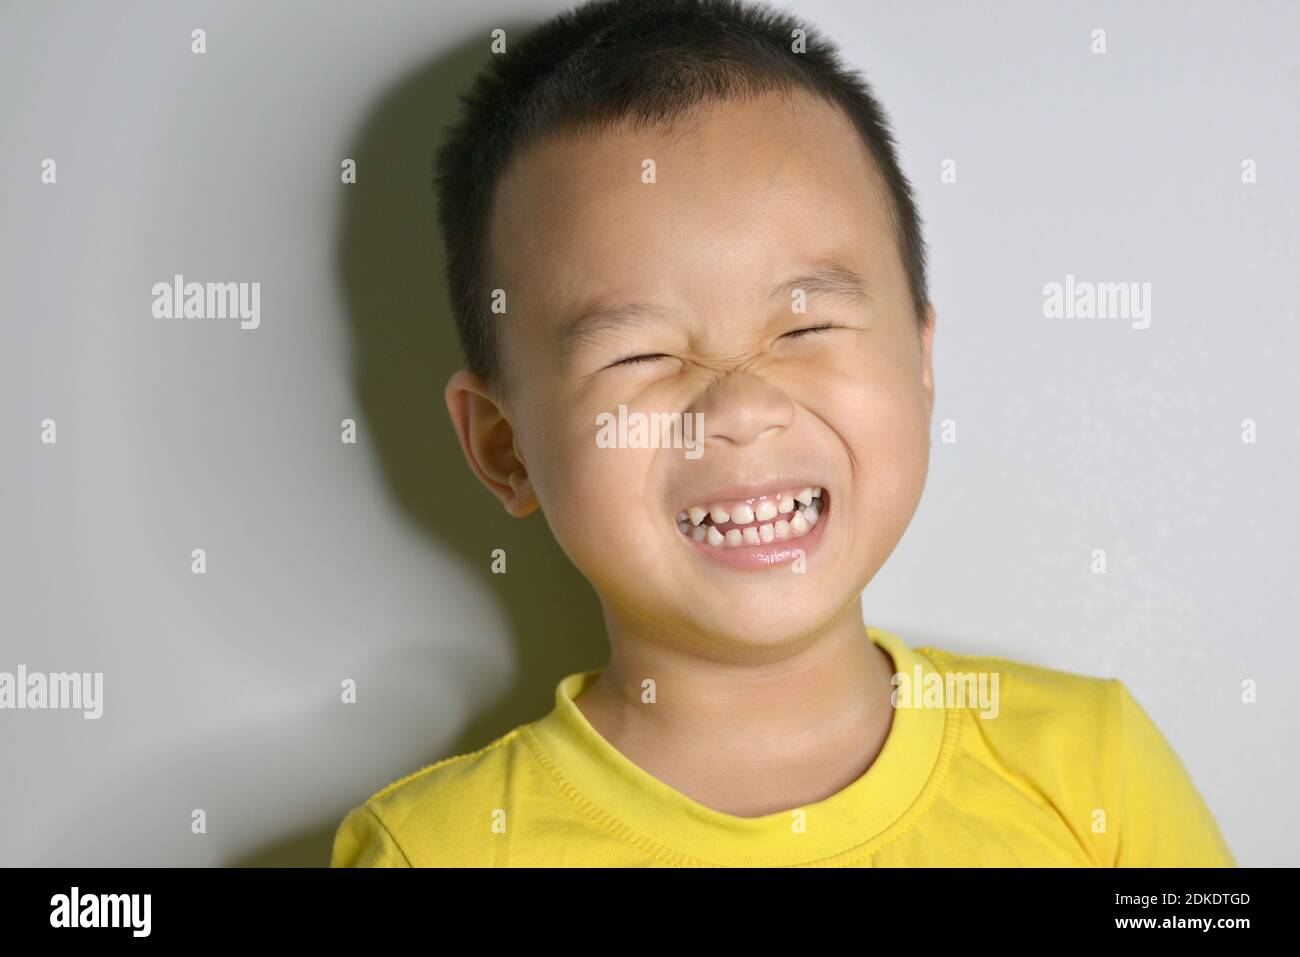 Smiling Boy Against Wall Stock Photo